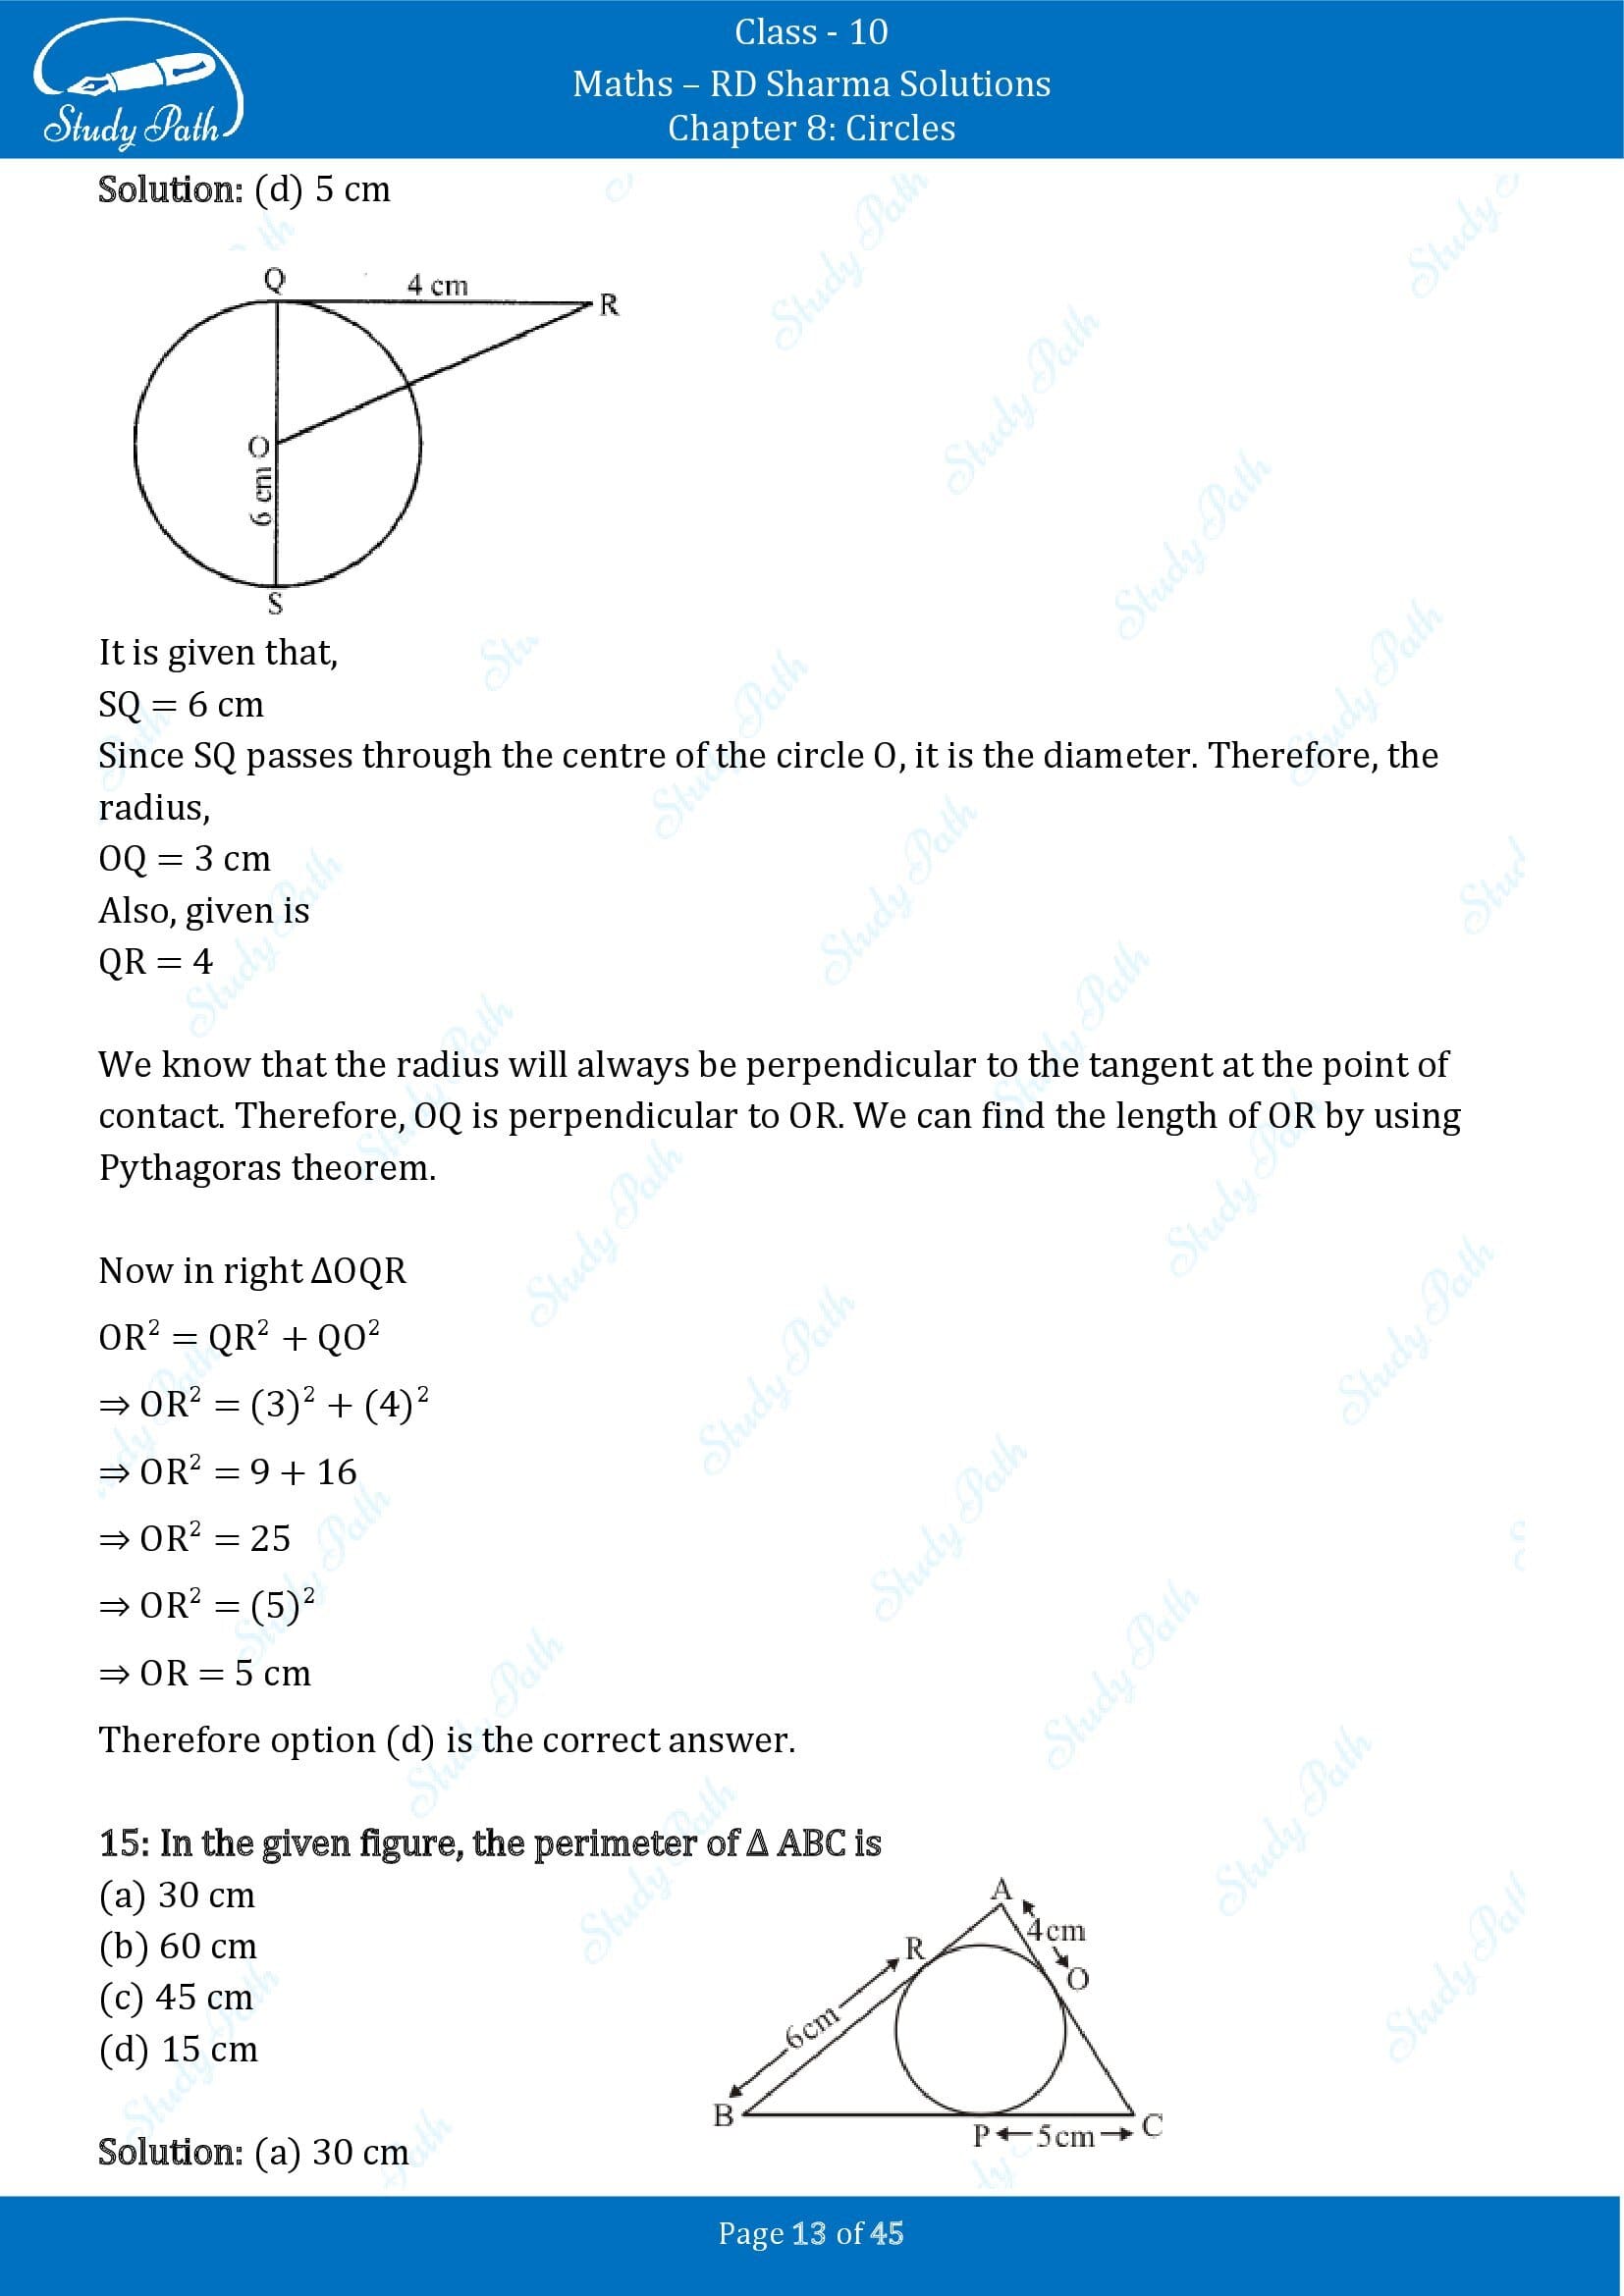 RD Sharma Solutions Class 10 Chapter 8 Circles Multiple Choice Questions MCQs 00013